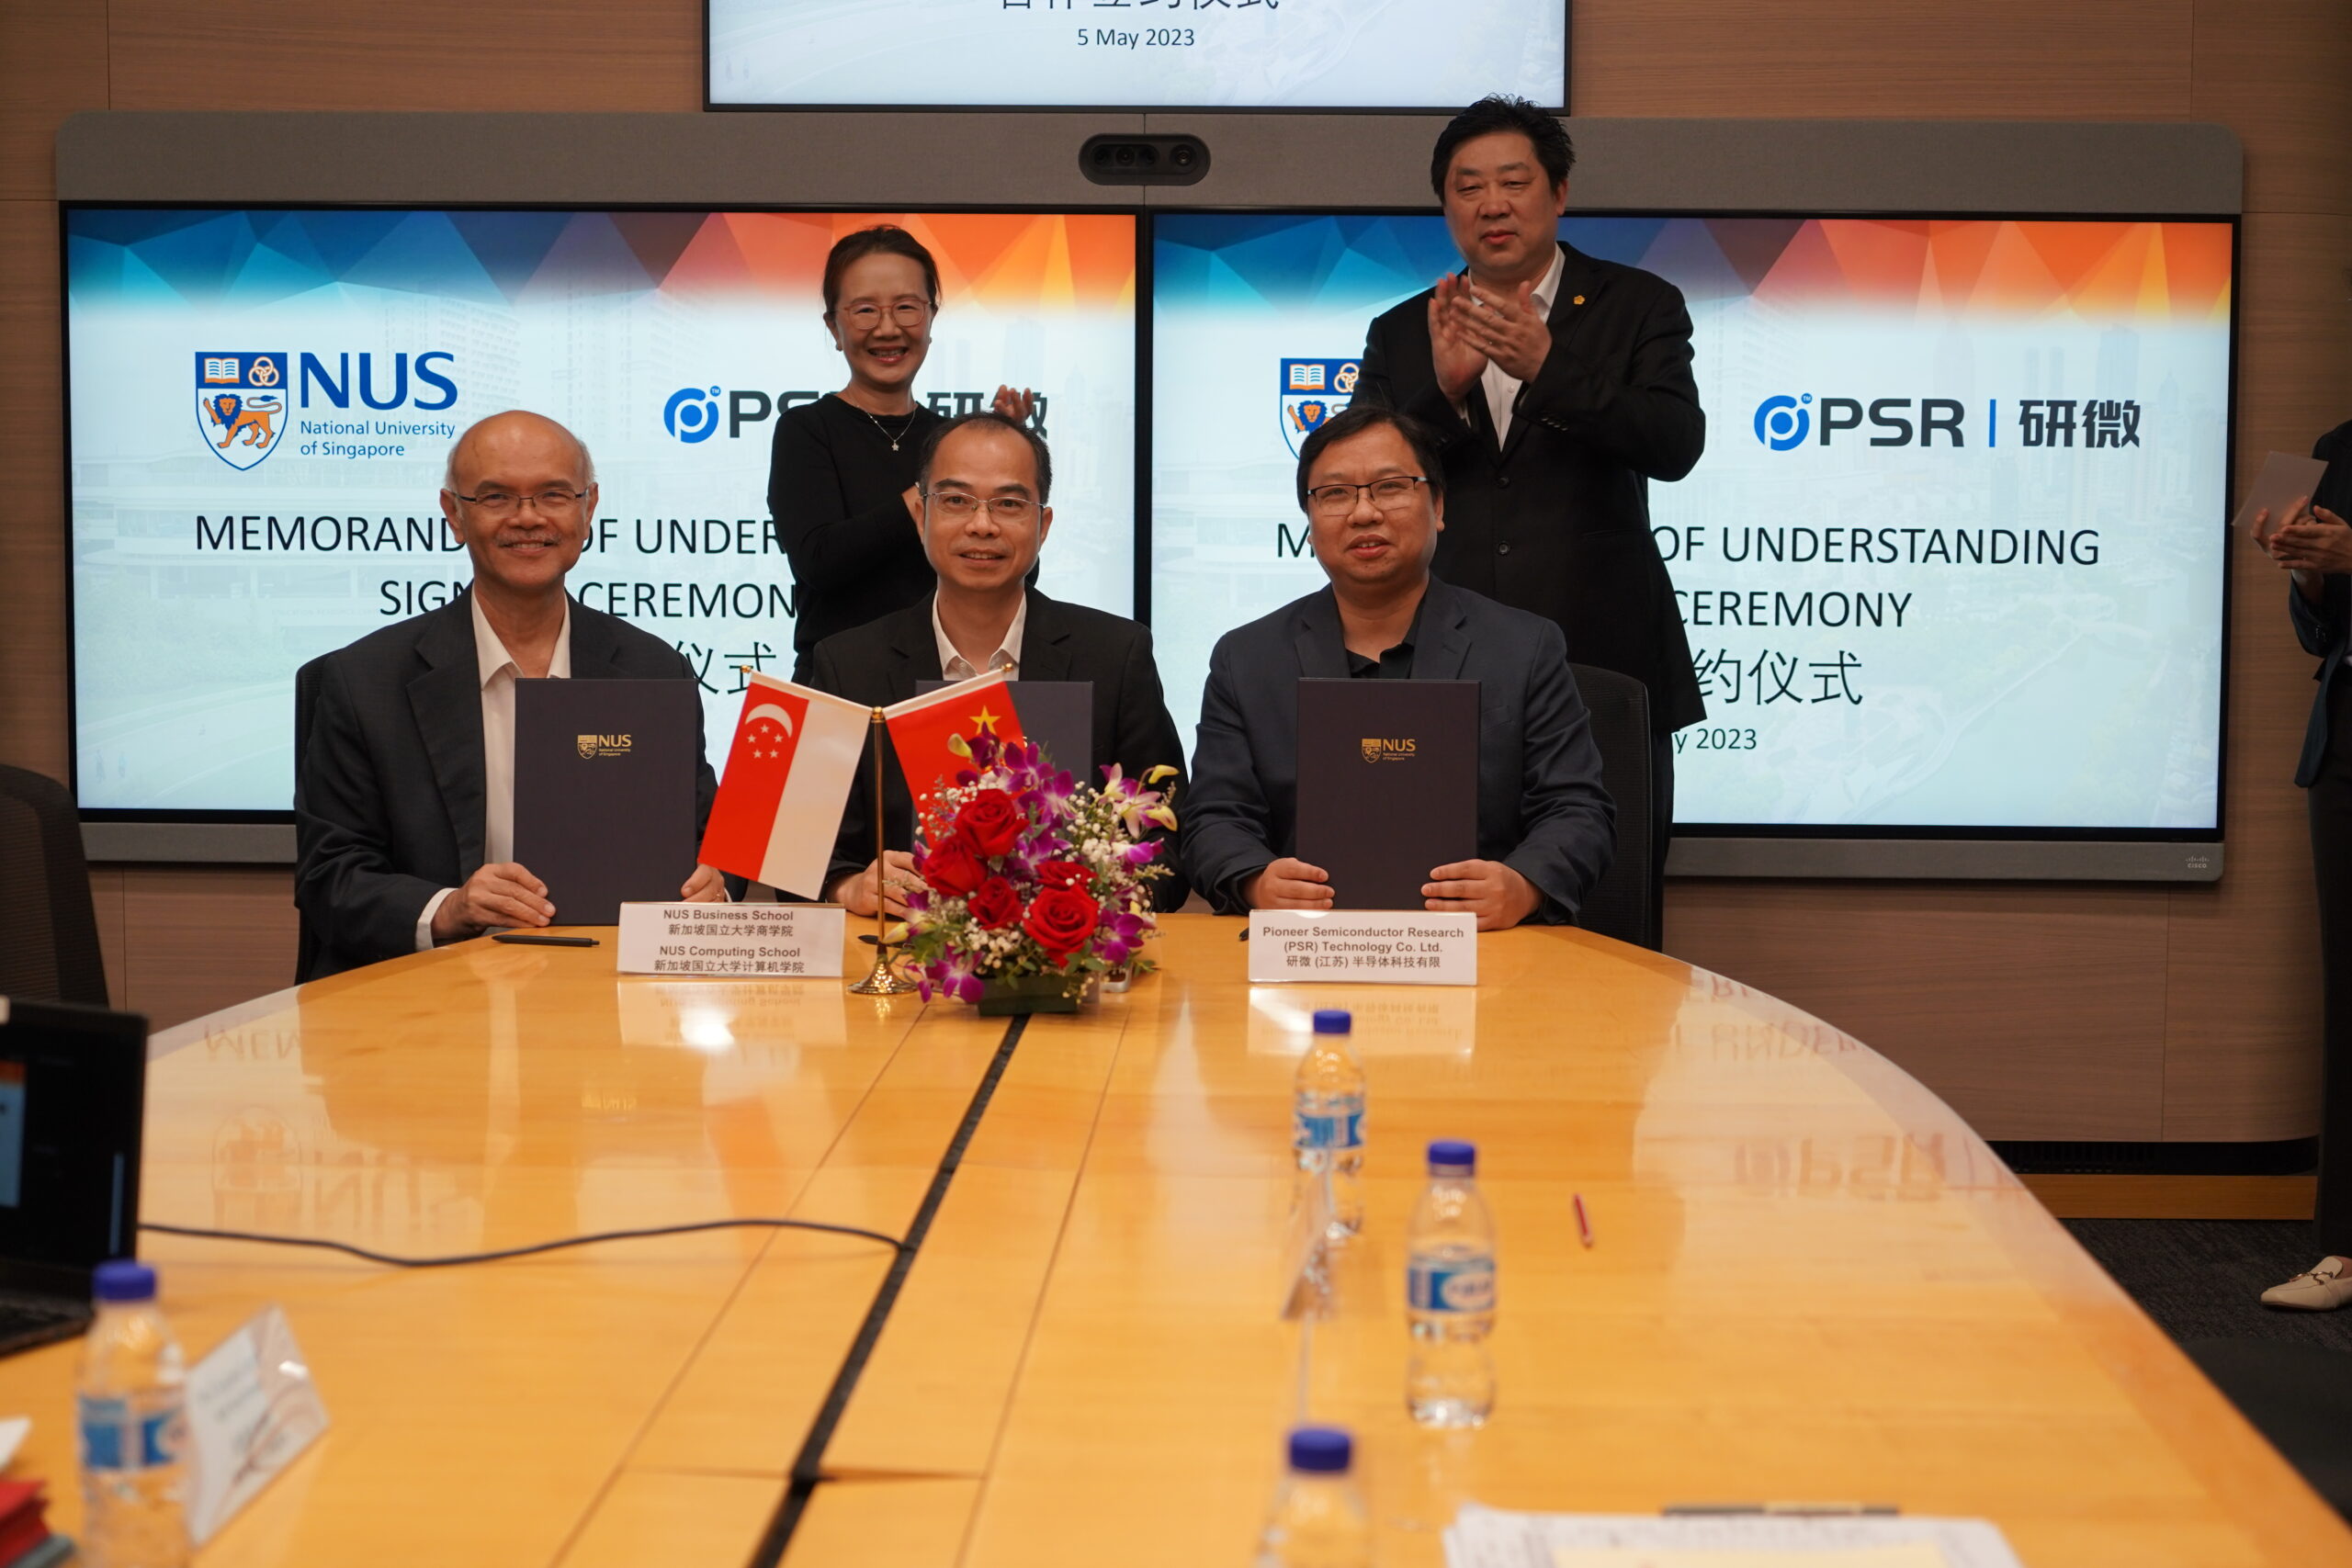 (Front row from left) Prof Khoo Siau Cheng, Co-Director, NUS Business Analytics Centre,  Prof James Pang, Co-Director of NUS Business Analytics Centre, and Dr Patrick Lin, Chairman of PSR Technology signed the agreement, witnessed by Prof Susanna Leong (back row left) and Mr Zhao Jianjun.